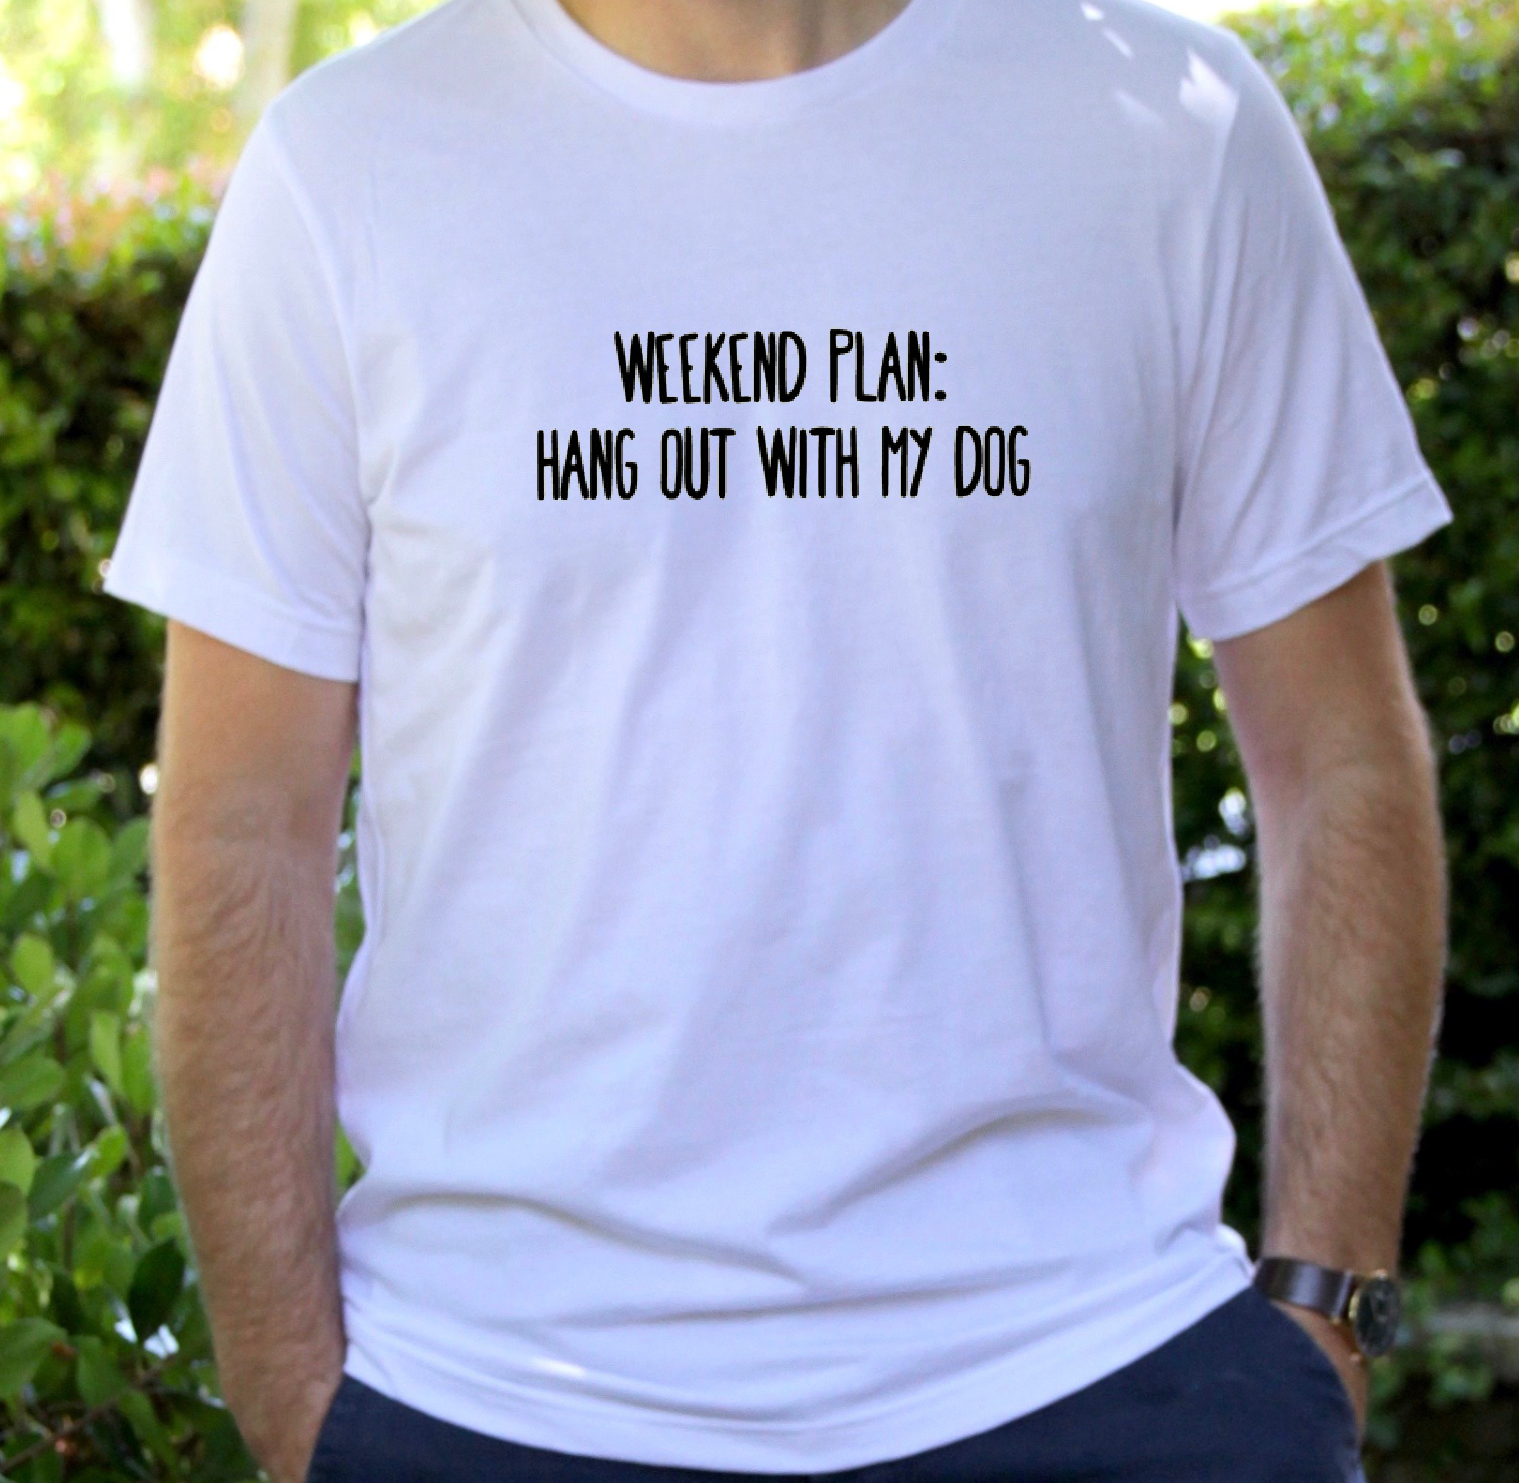 Hang Out with my Dog T-Shirt - Organic Cotton Men's TShirt